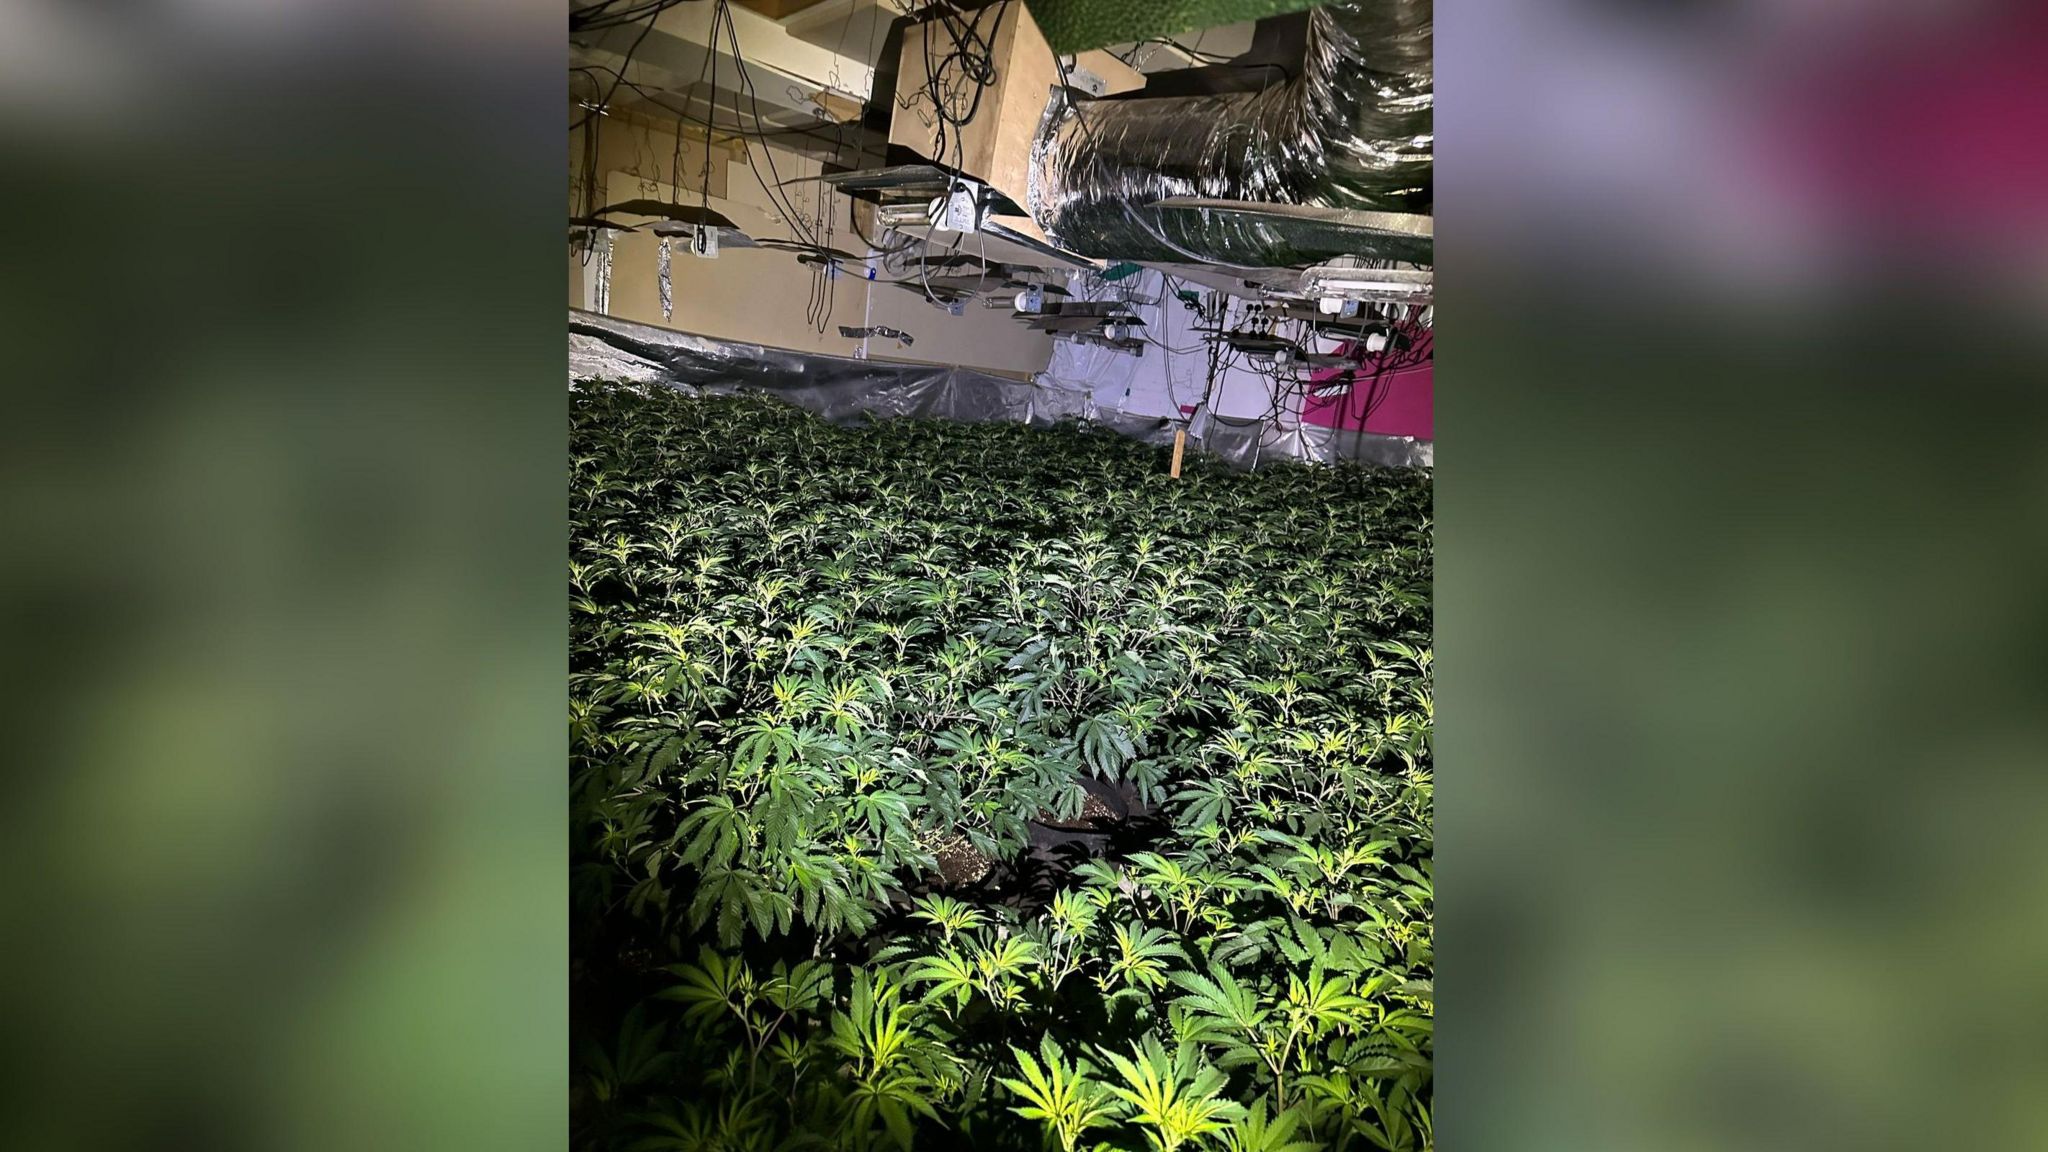 Thousands of cannabis plants found with equipment at this large-scale growing operation in Stockport 